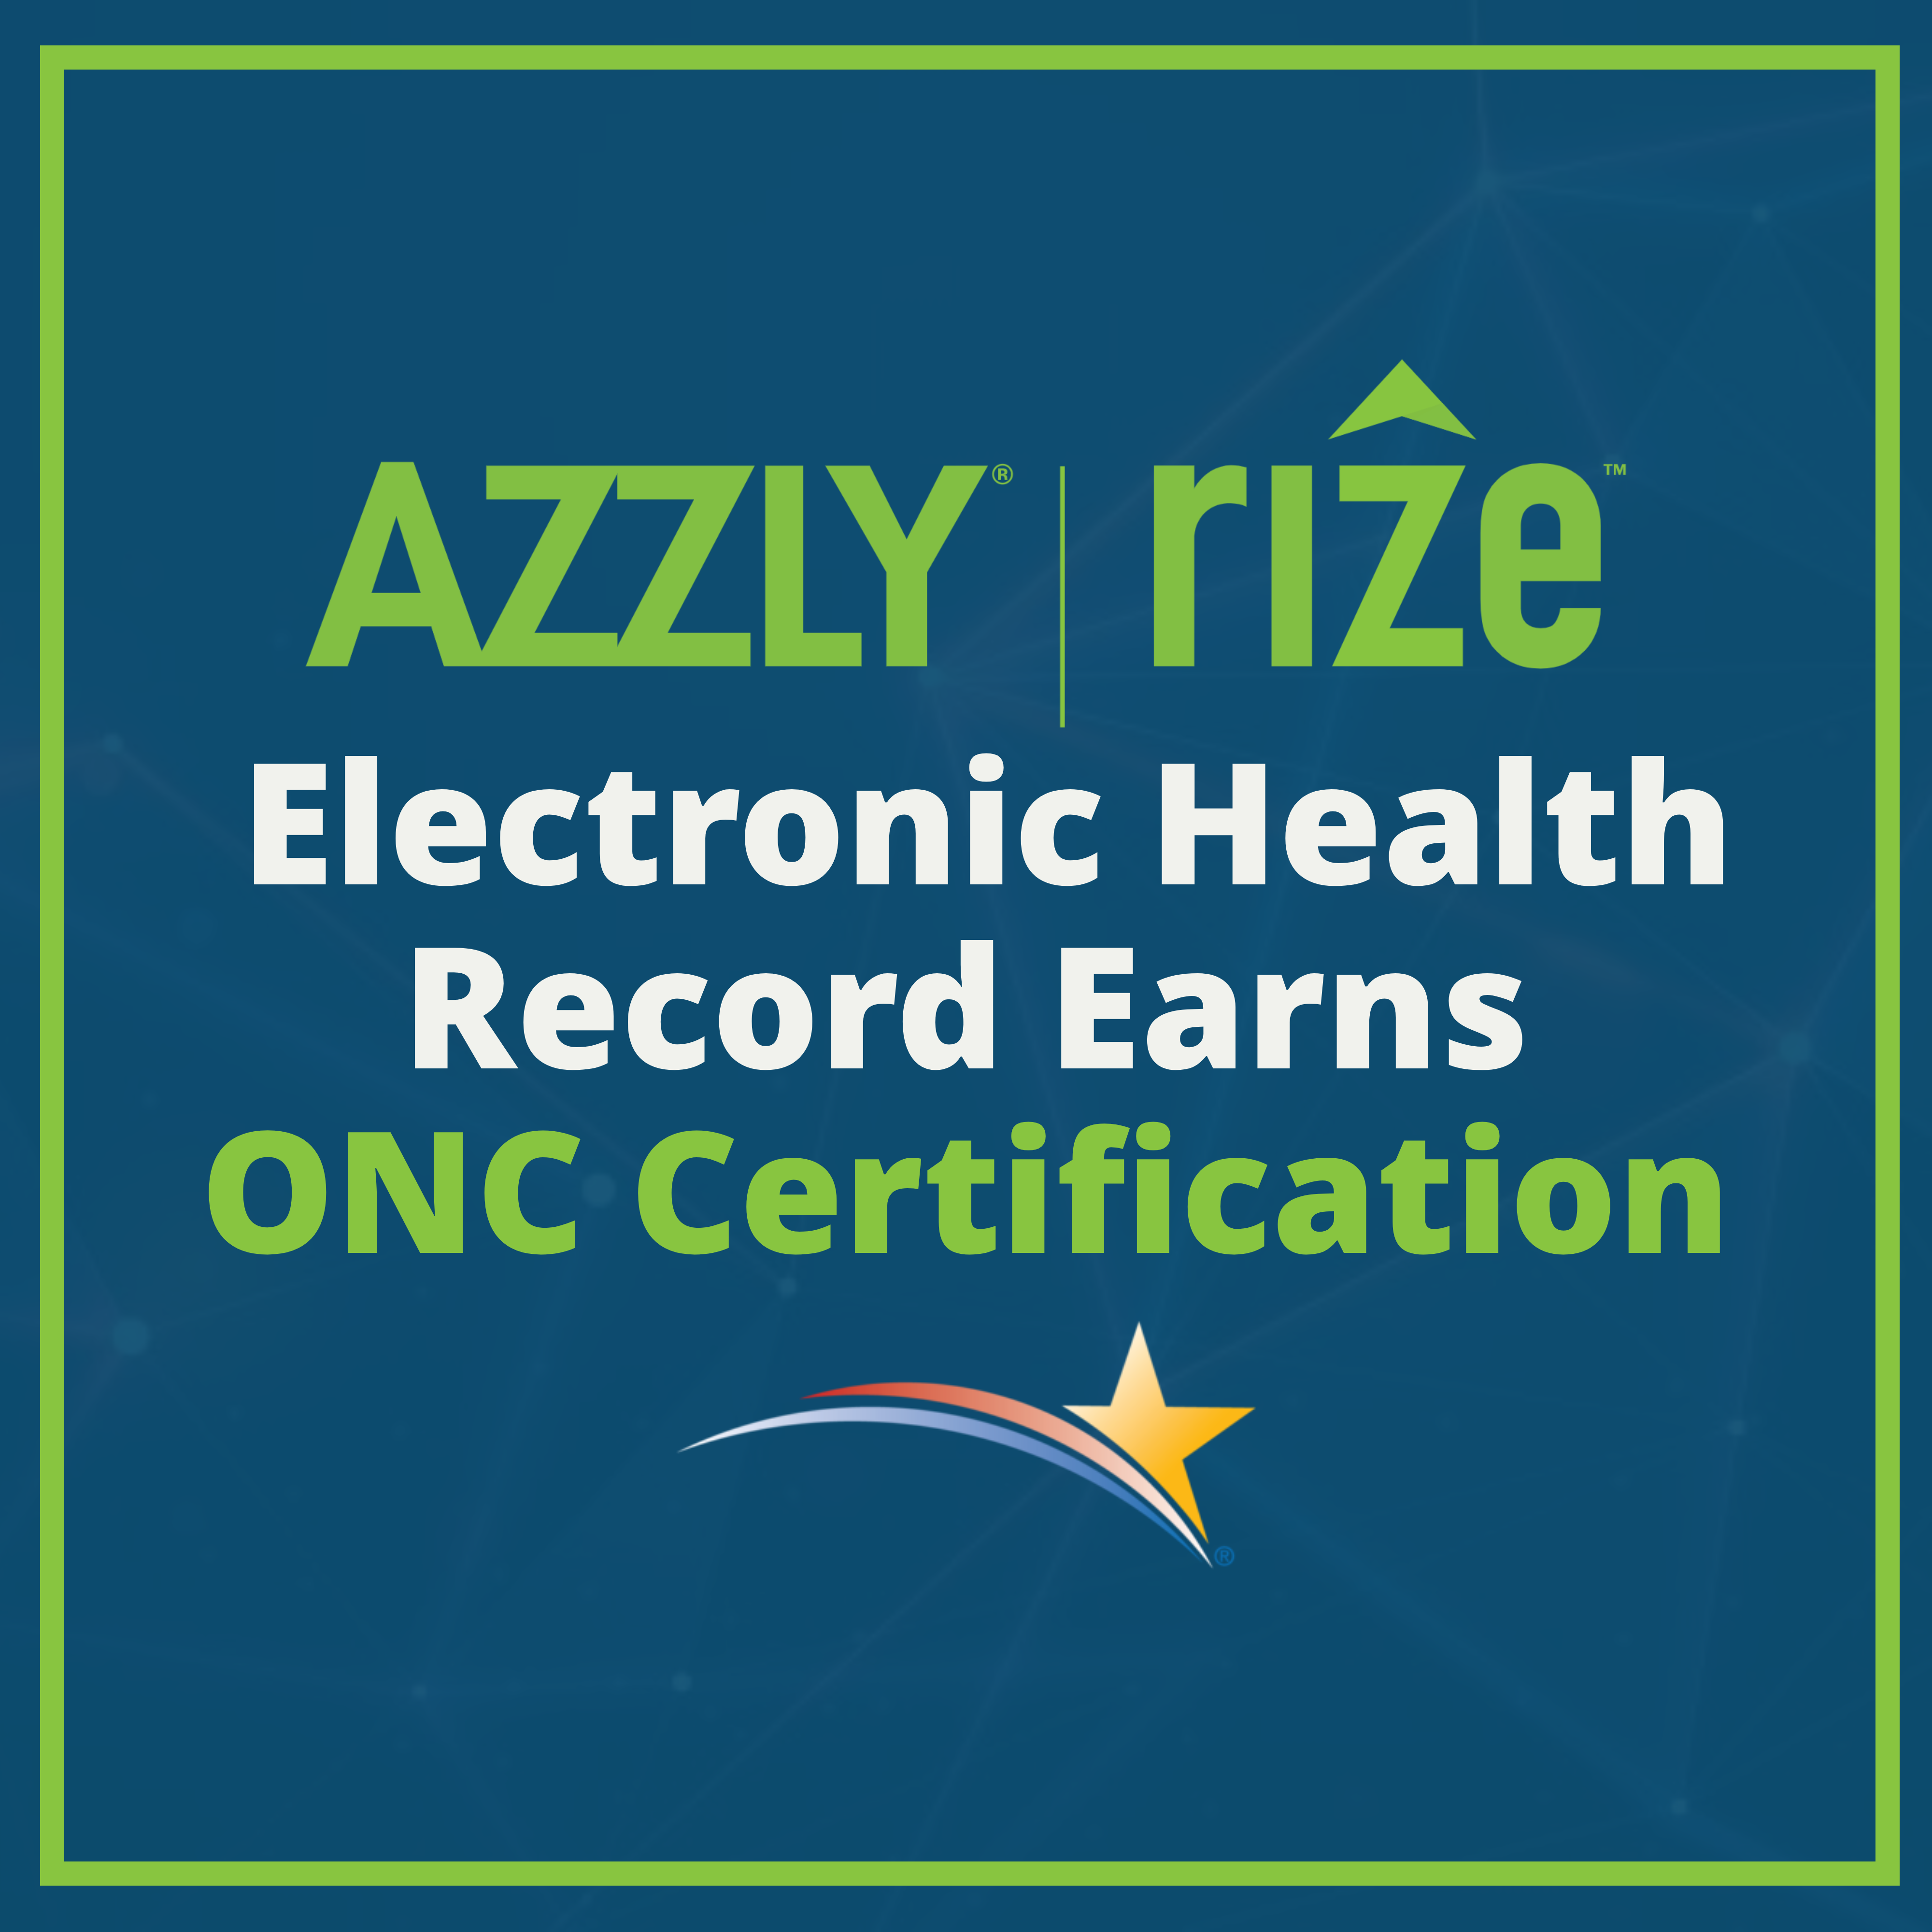 Azzly Rize EHR Earns ONC Certification